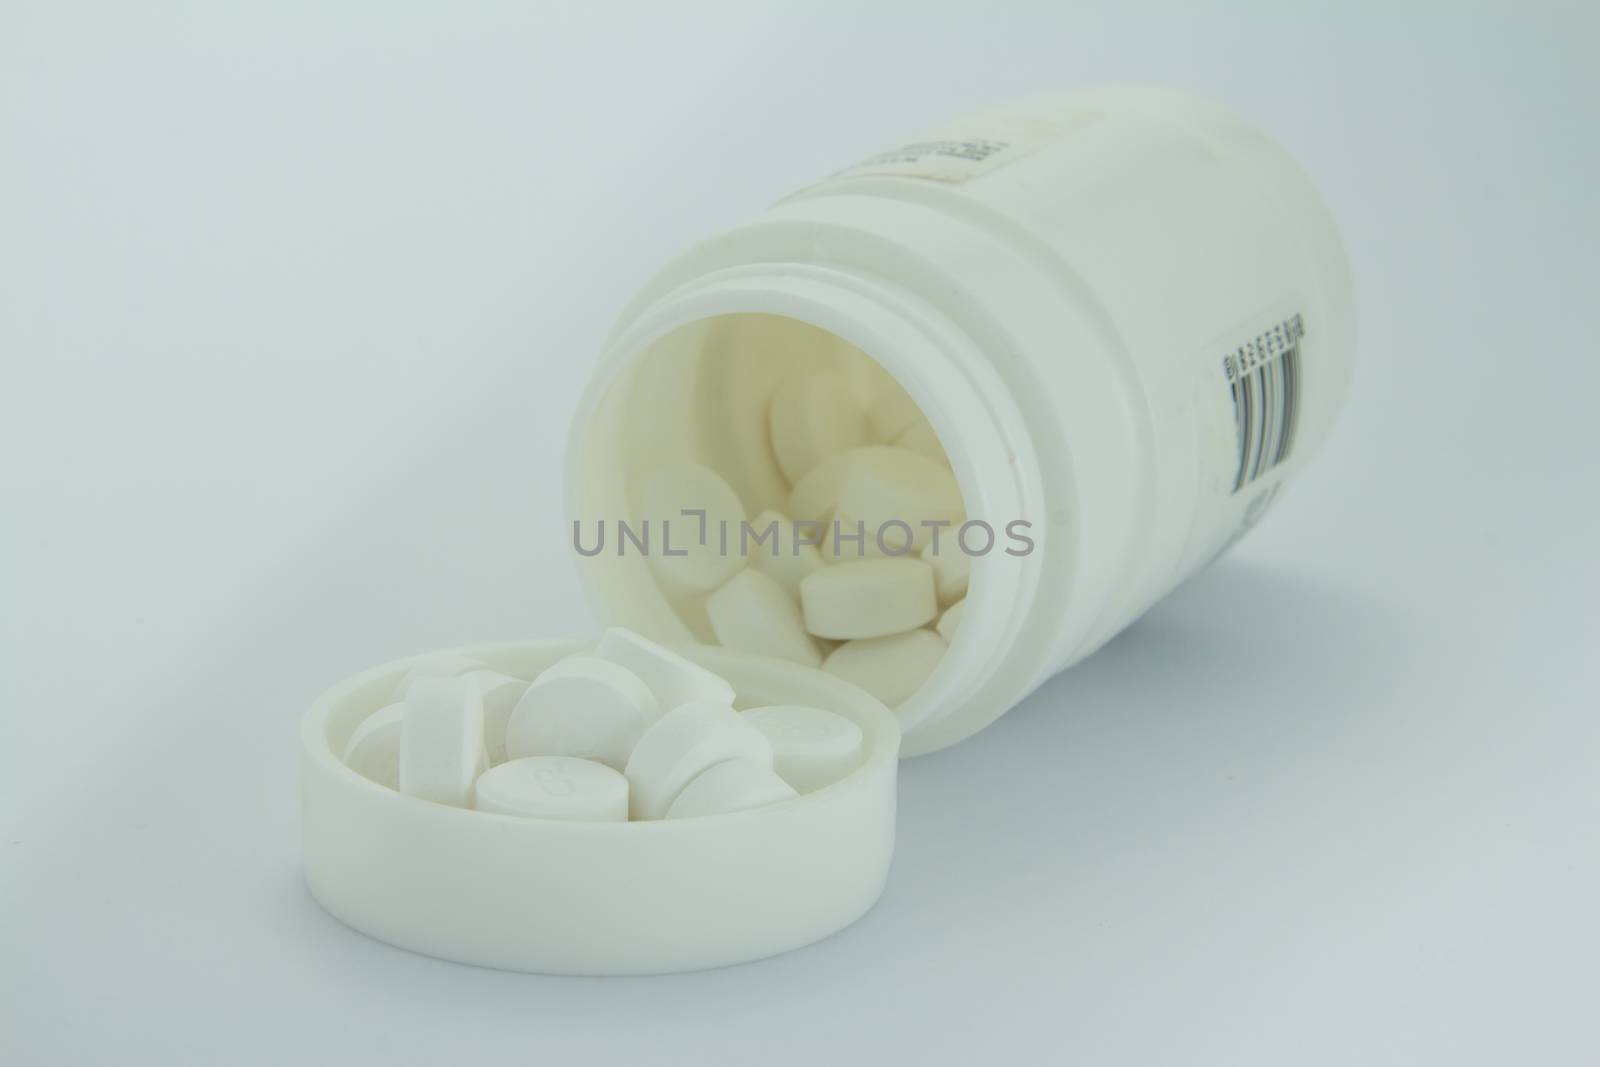 White pills an pill bottle on white background by peerapixs